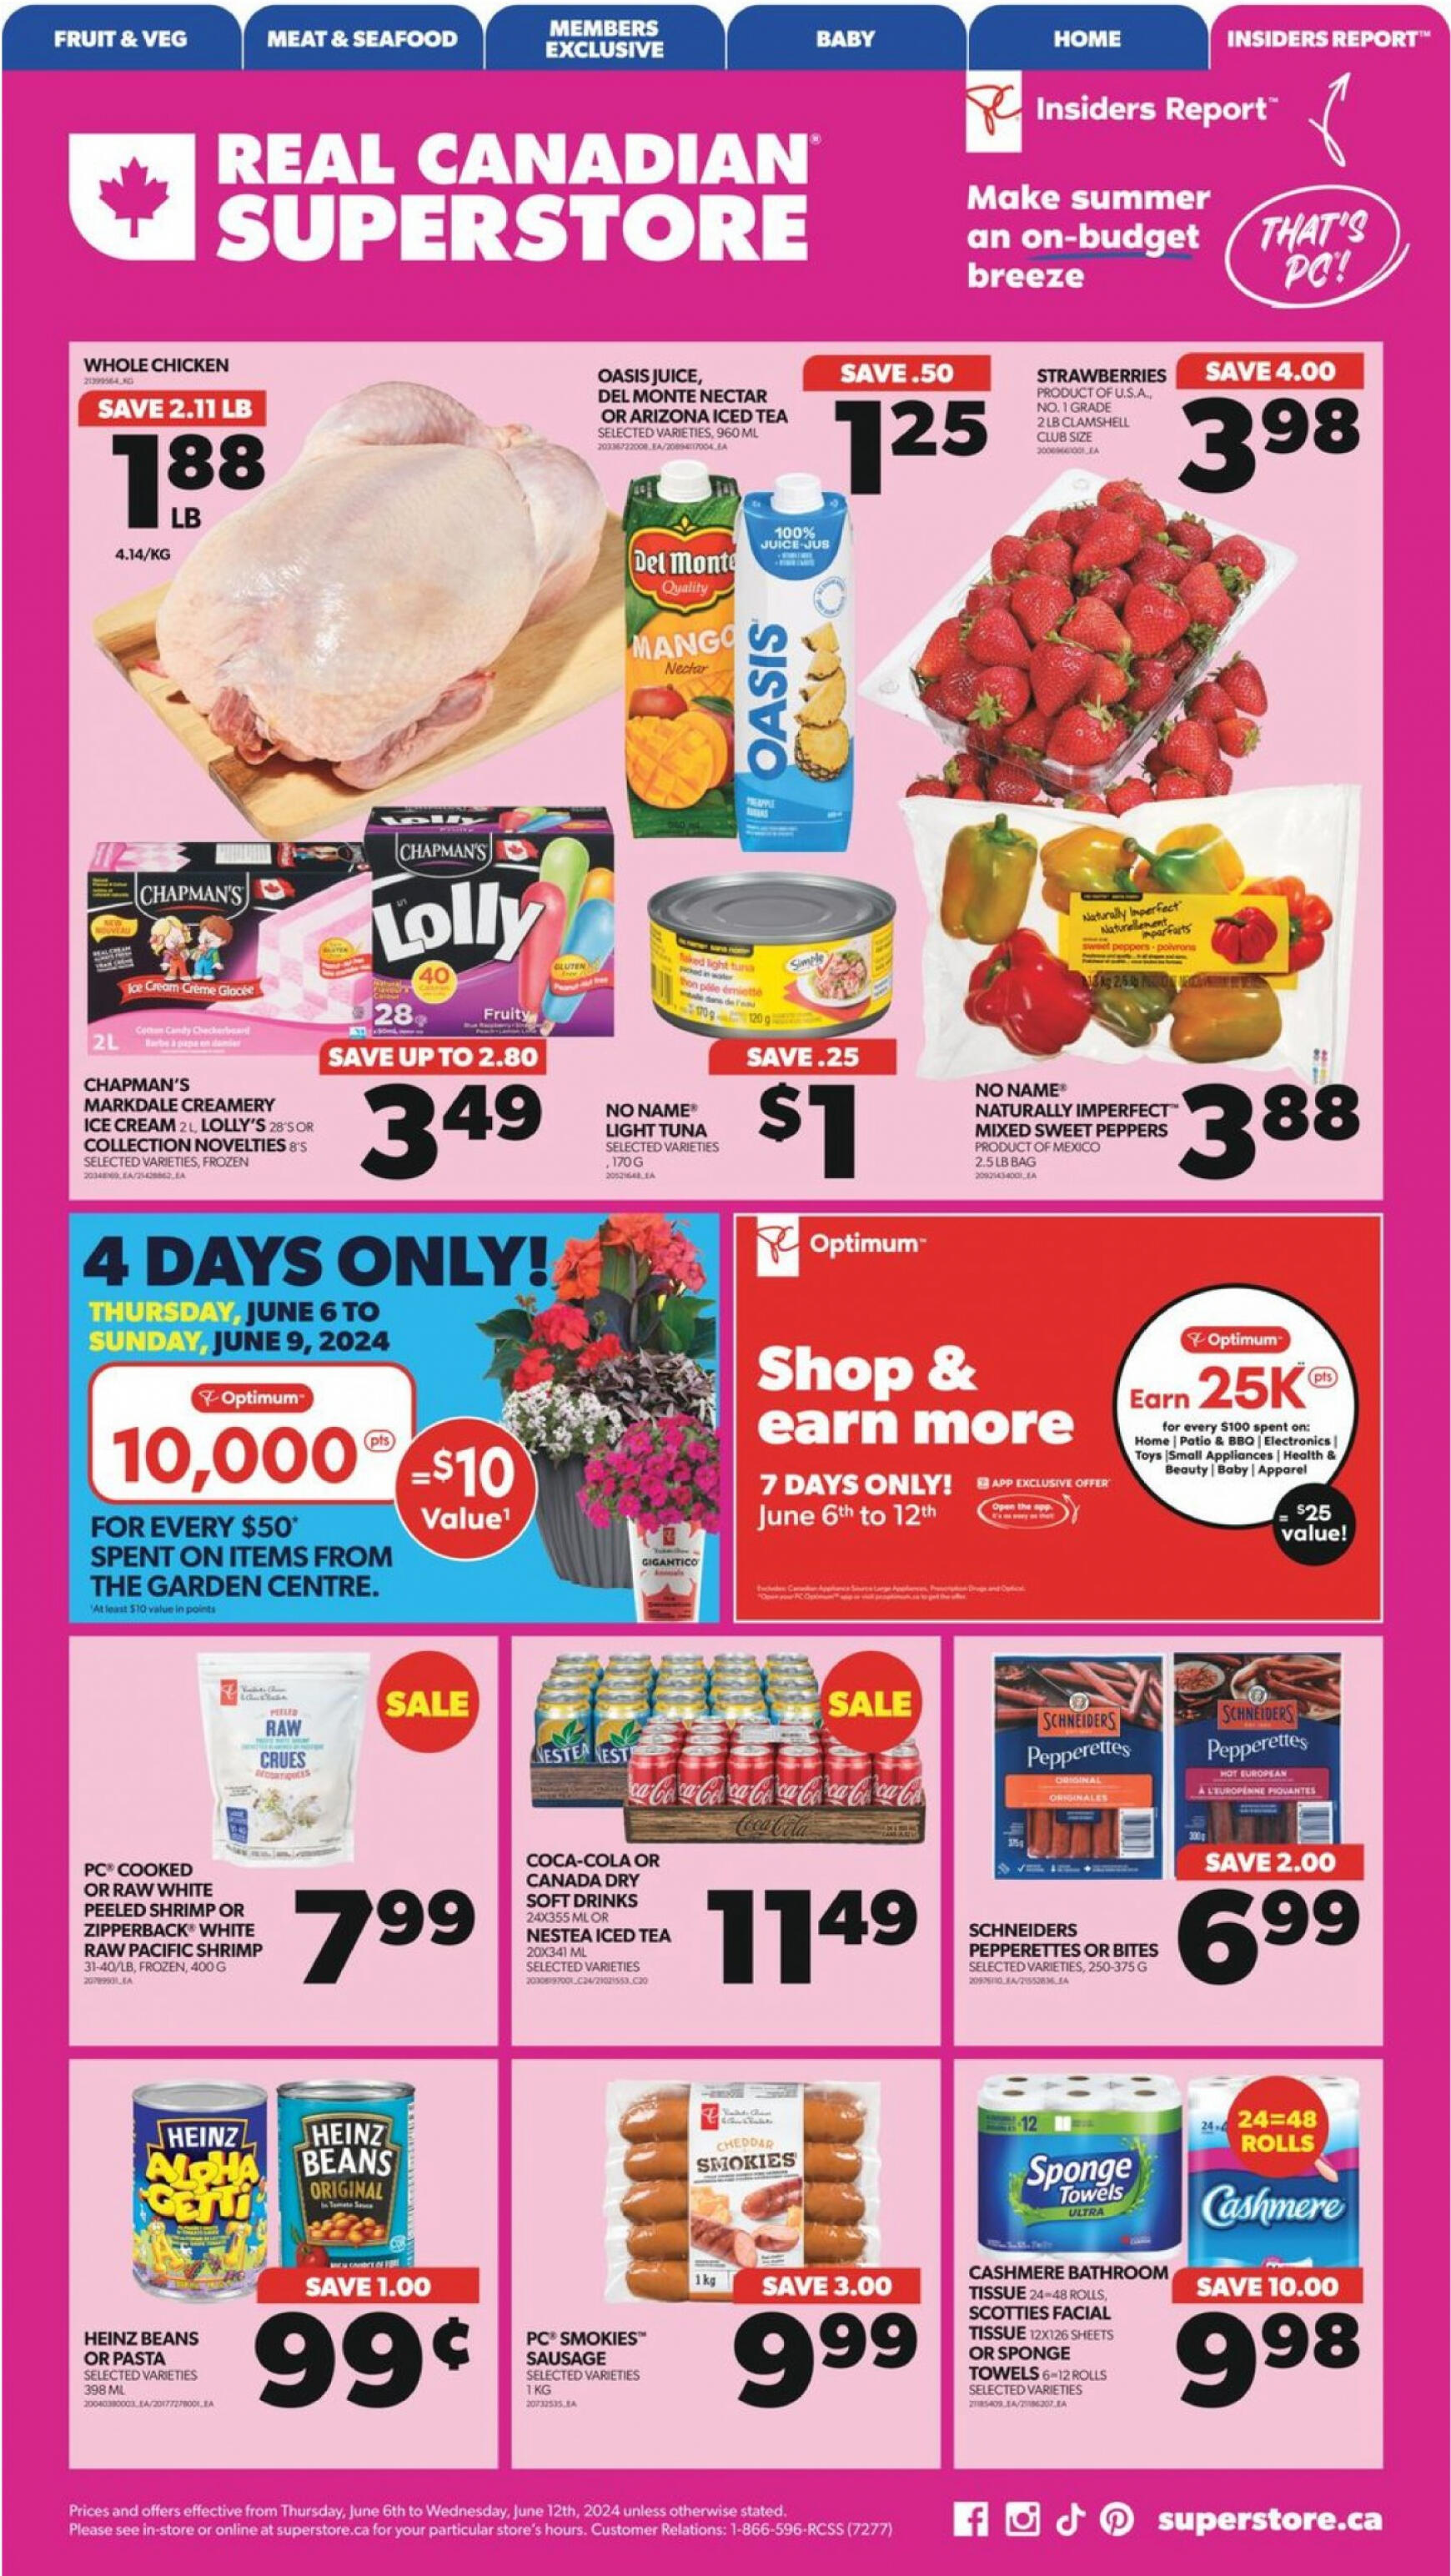 real-canadian-superstore - Real Canadian Superstore flyer current 06.06. - 12.06. - page: 2